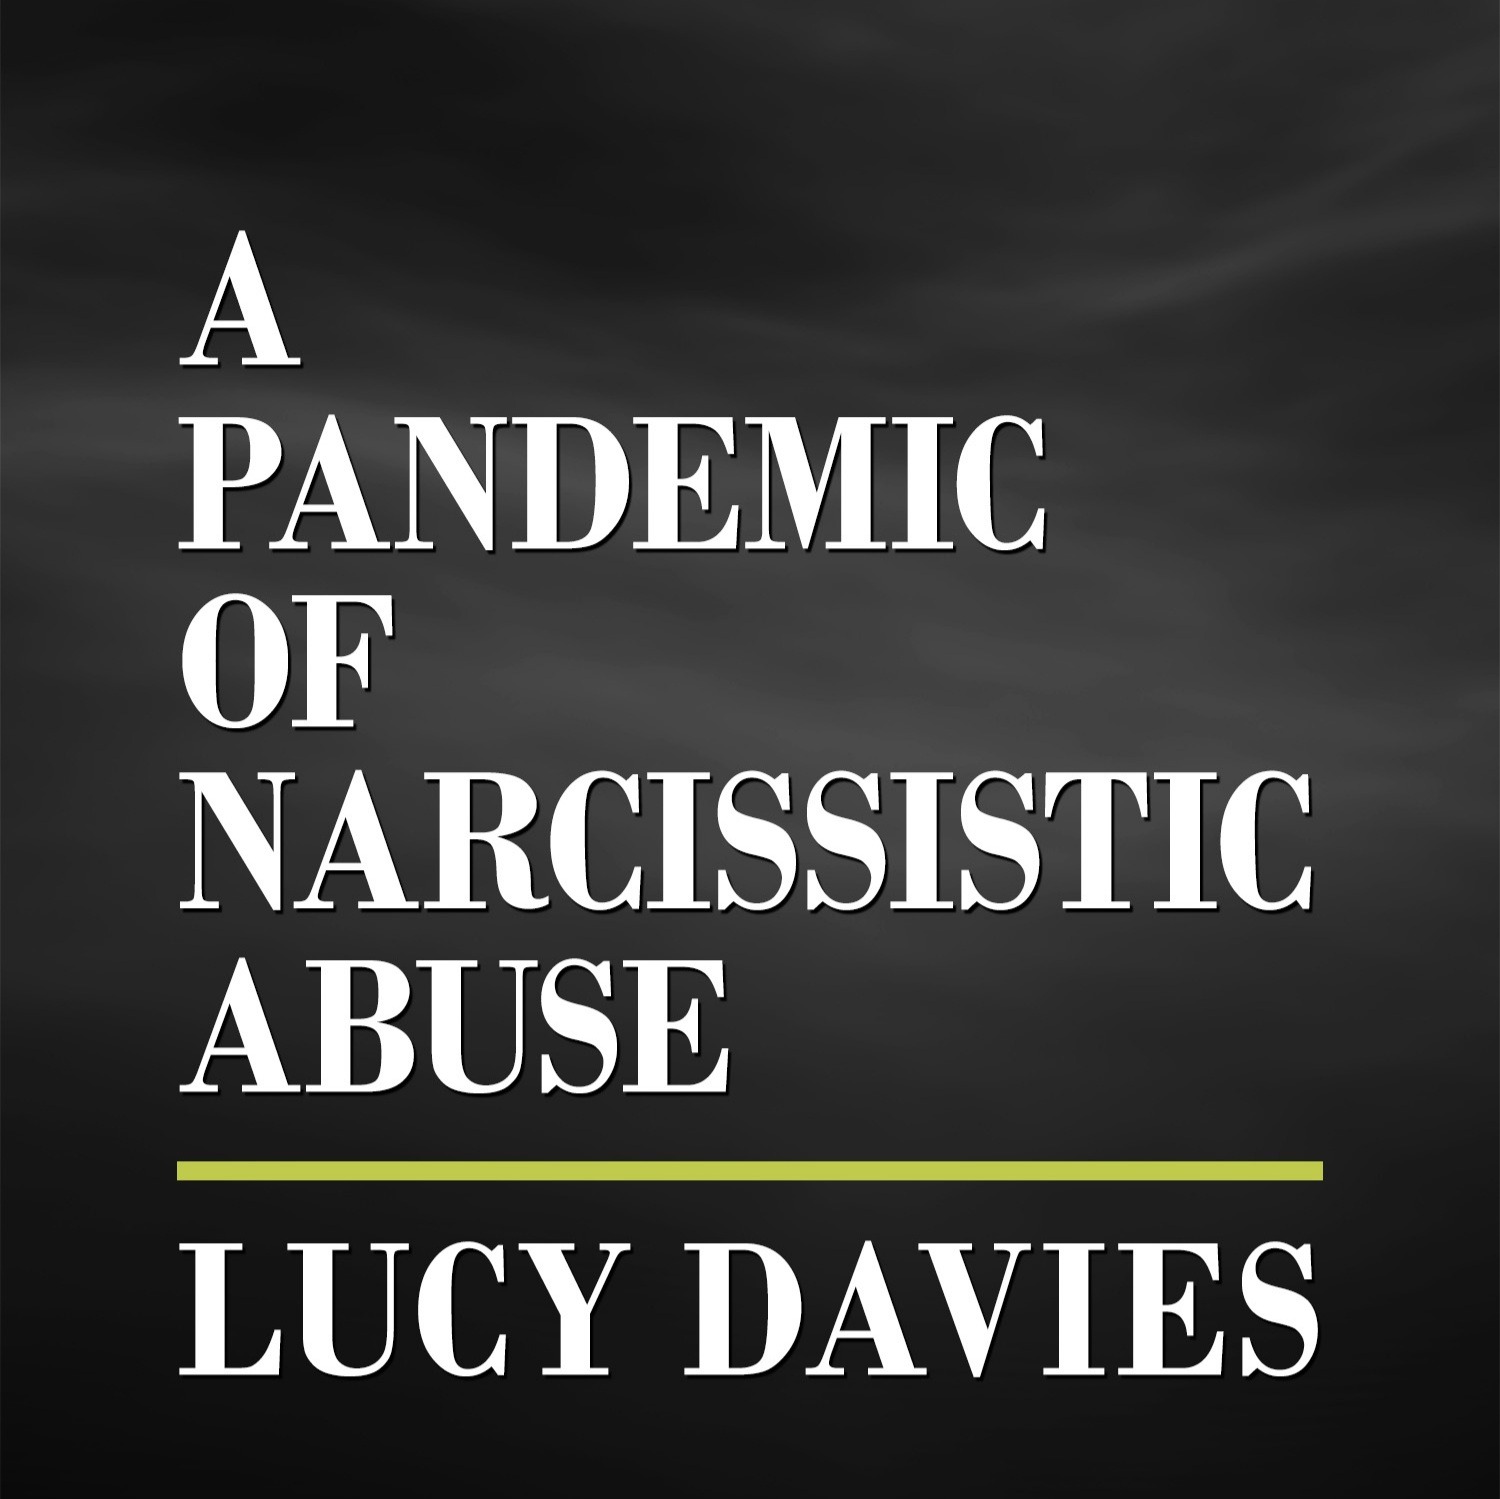 A Pandemic of Narcissistic Abuse